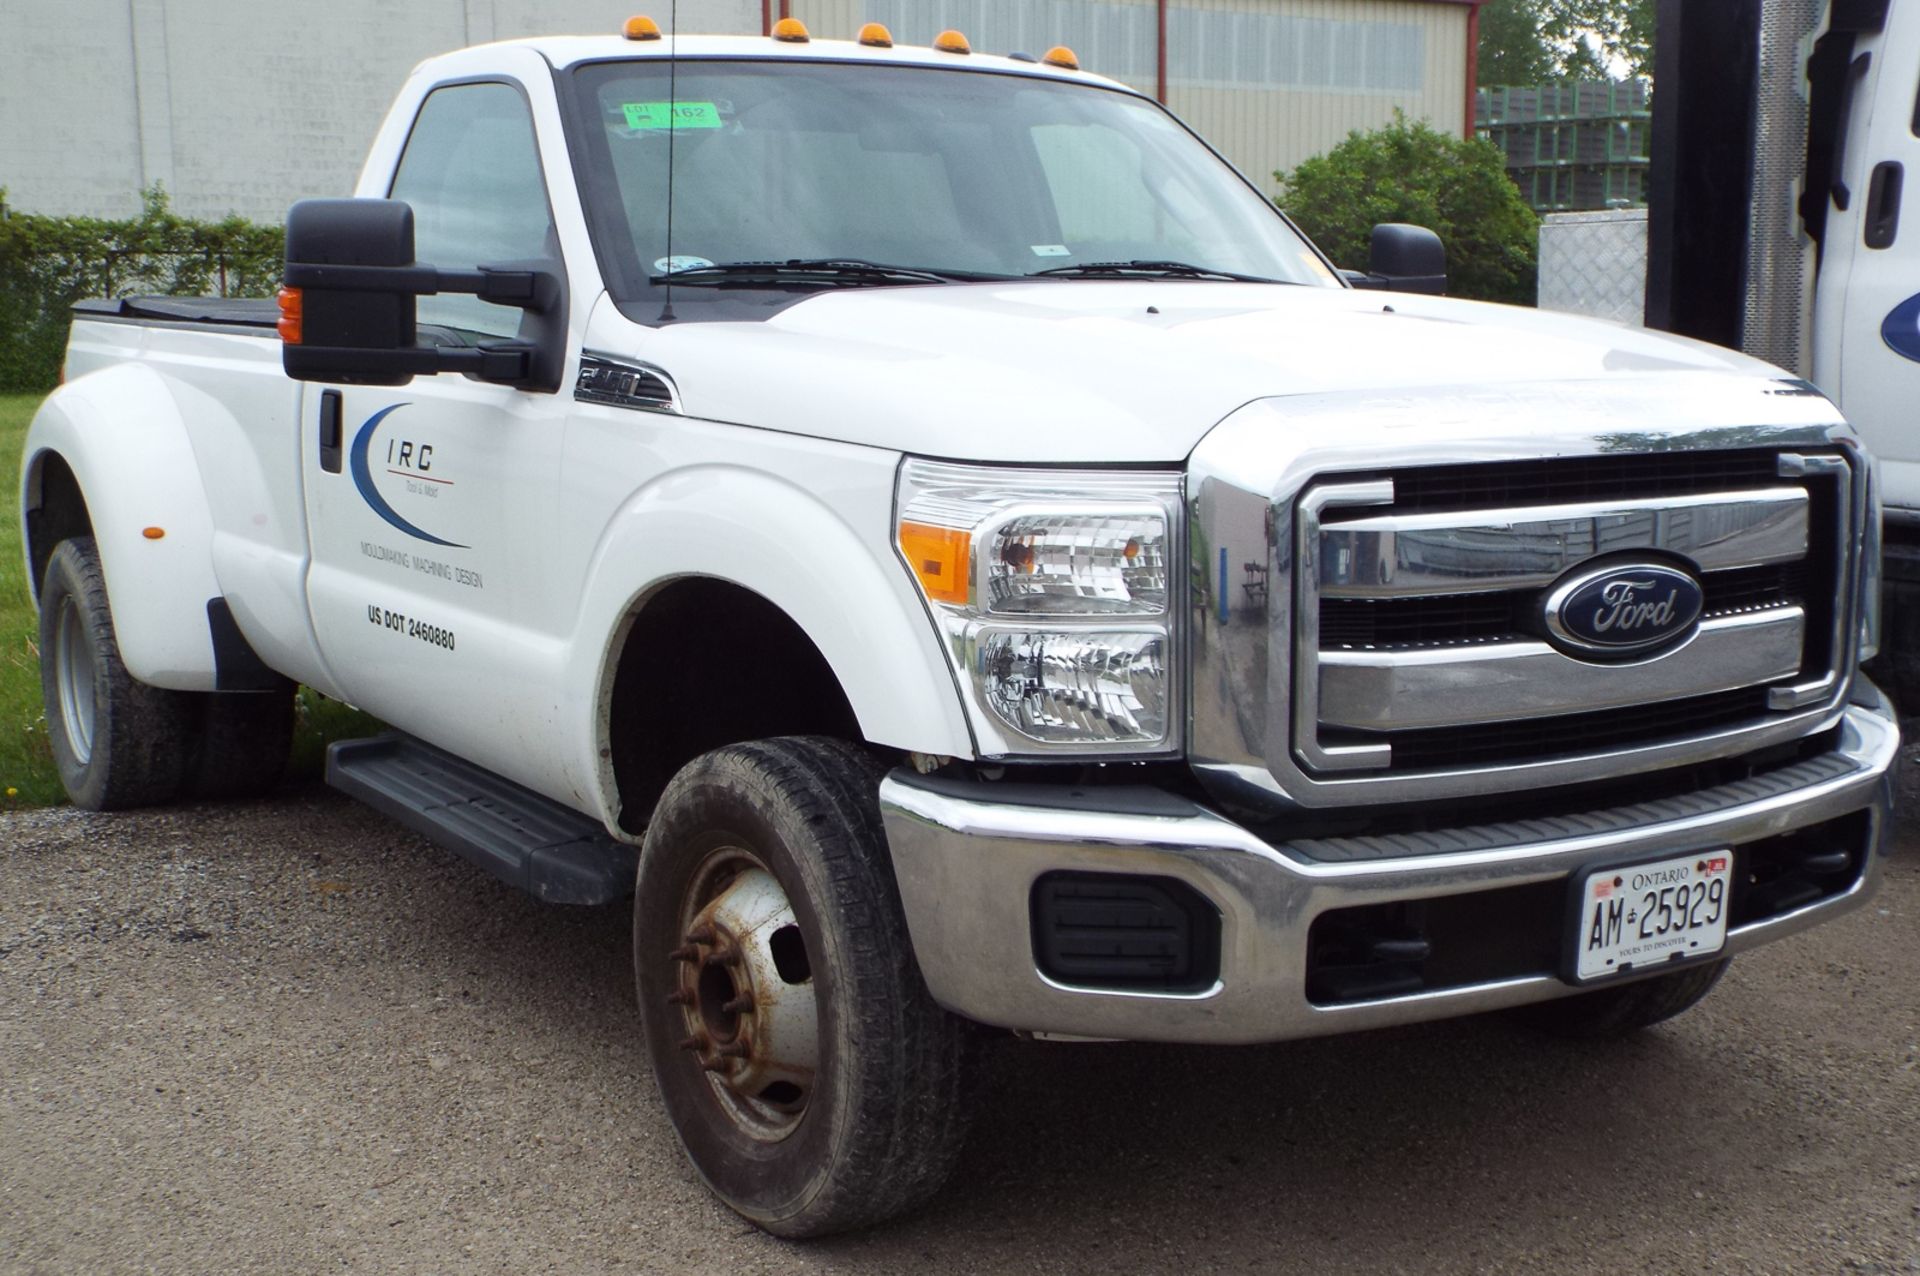 FORD (2012) F-350 XLT SUPERDUTY 2 DOOR DUALLY PICKUP TRUCK WITH 6.2 LITRE V8 ENGINE, AUTOMATIC